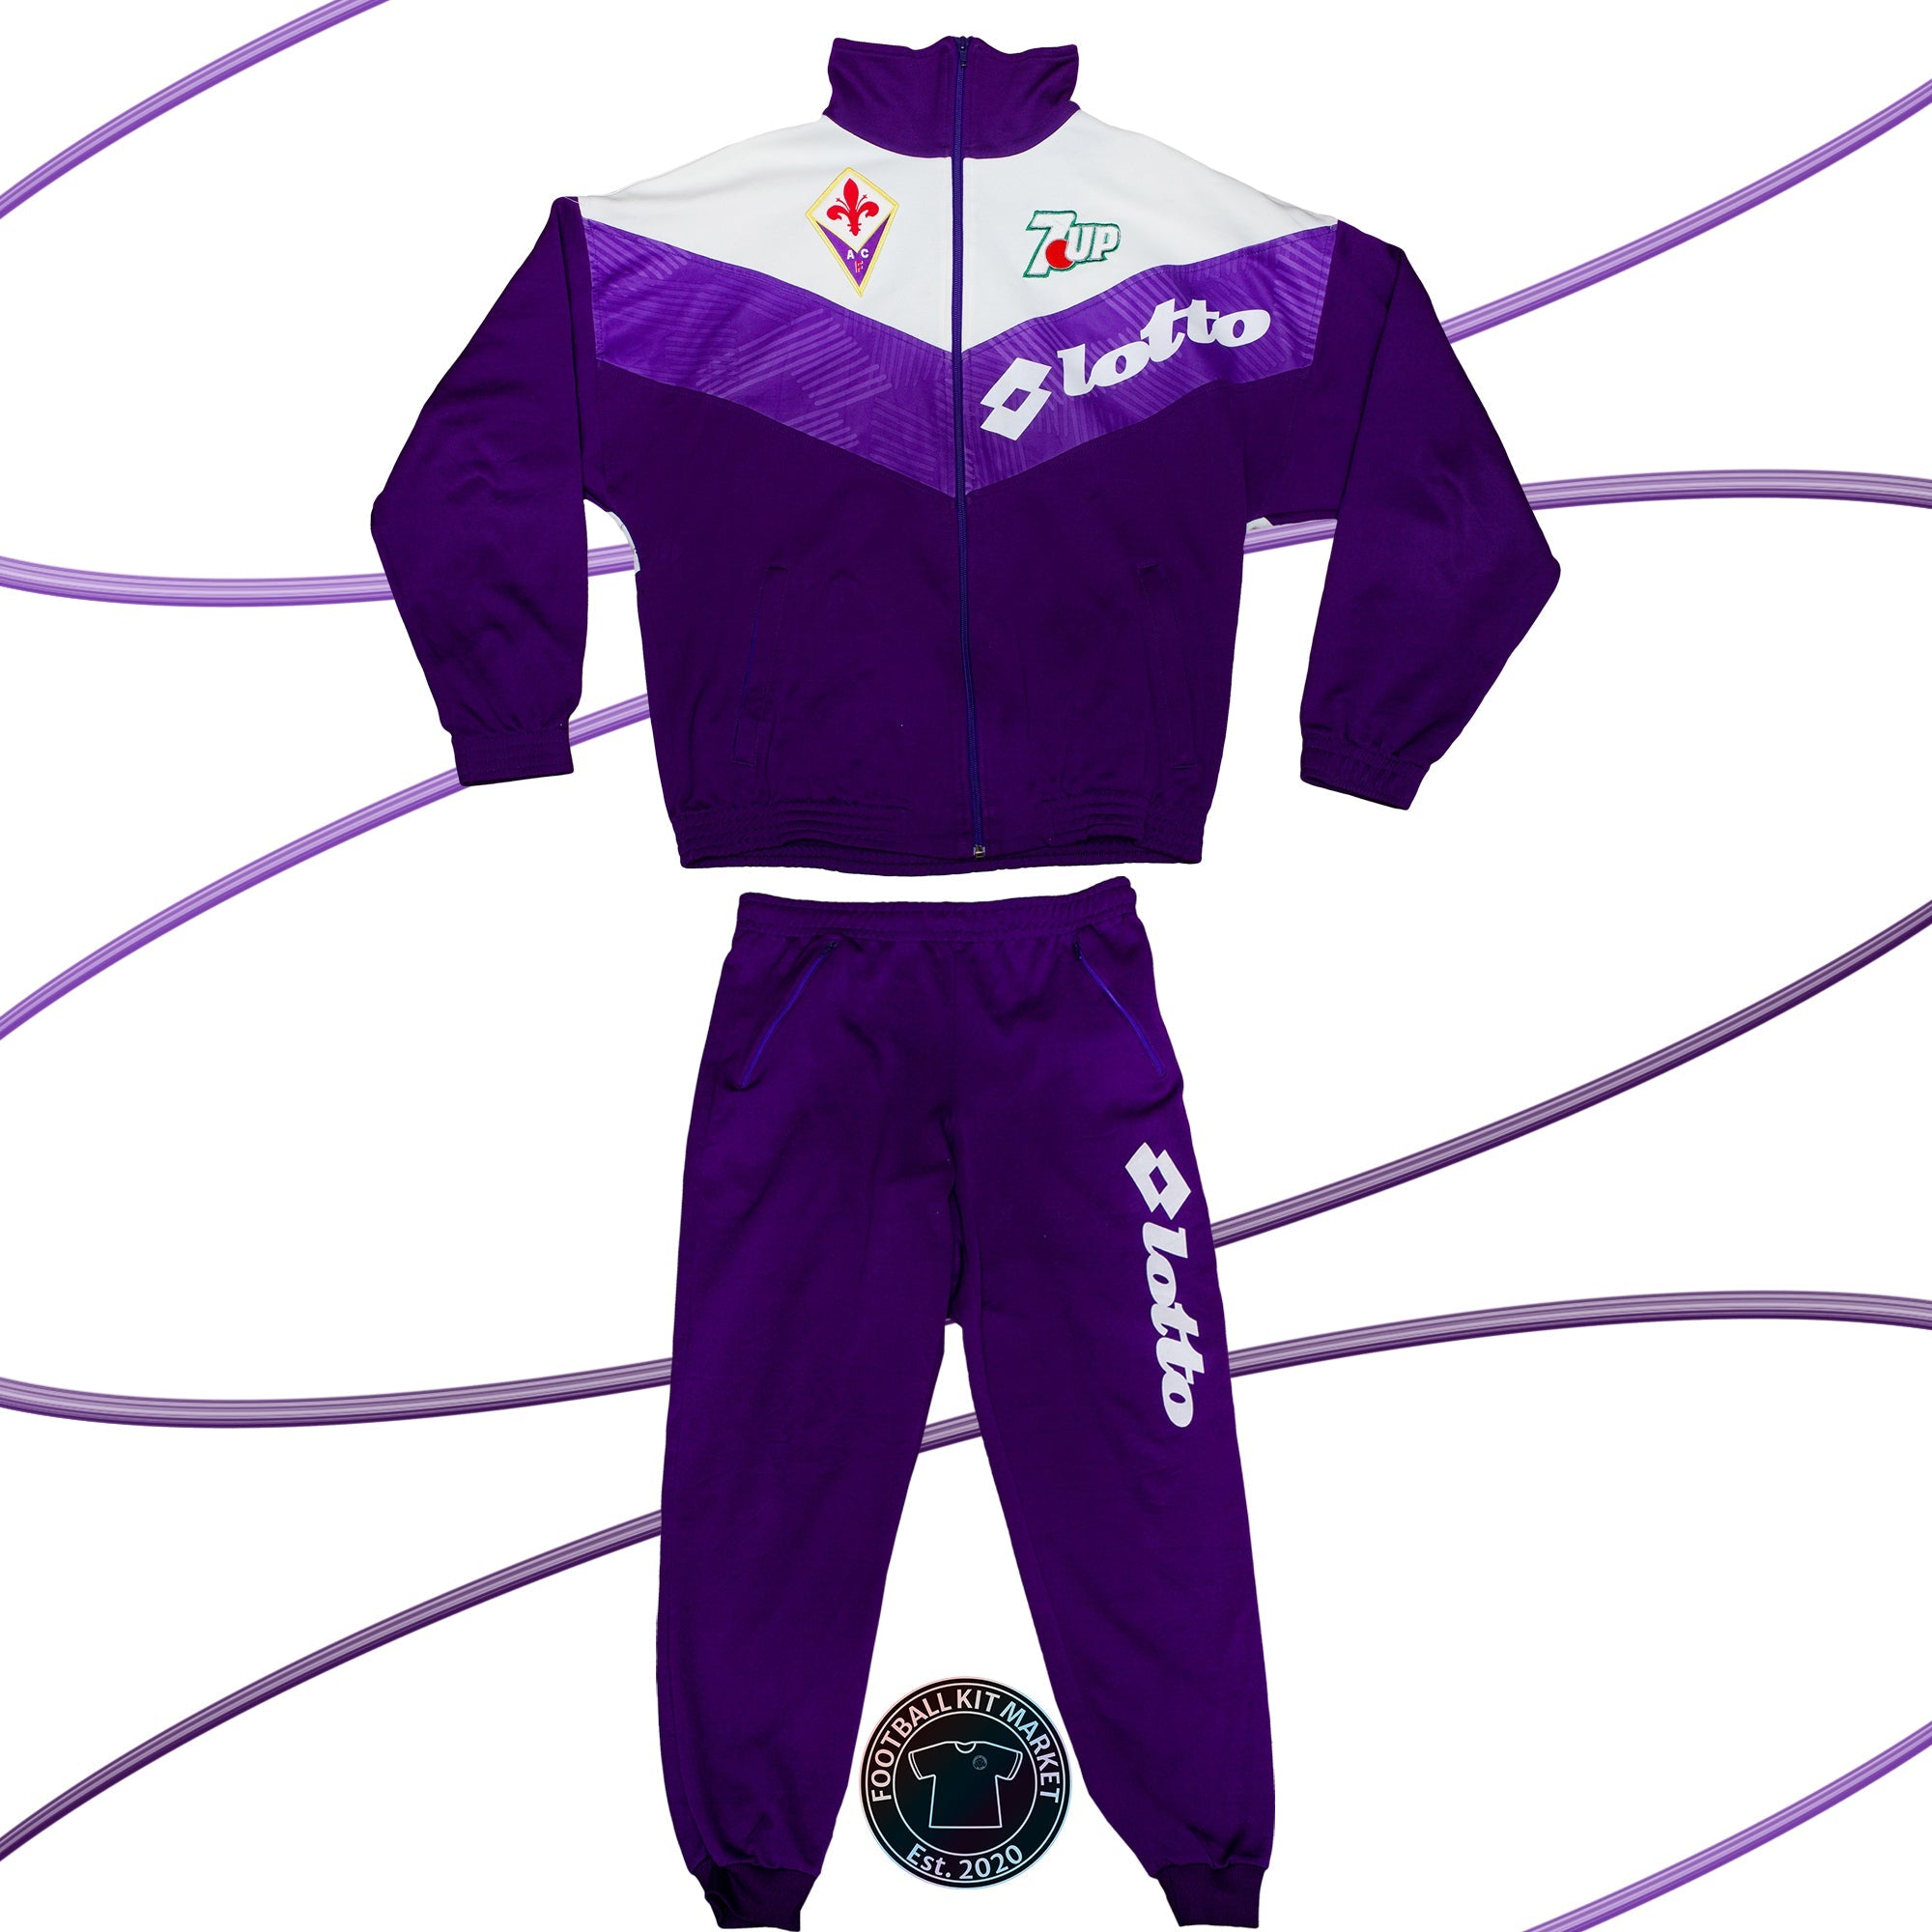 Genuine FIORENTINA Tracksuit (1992-1993) - LOTTO (L) - Product Image from Football Kit Market